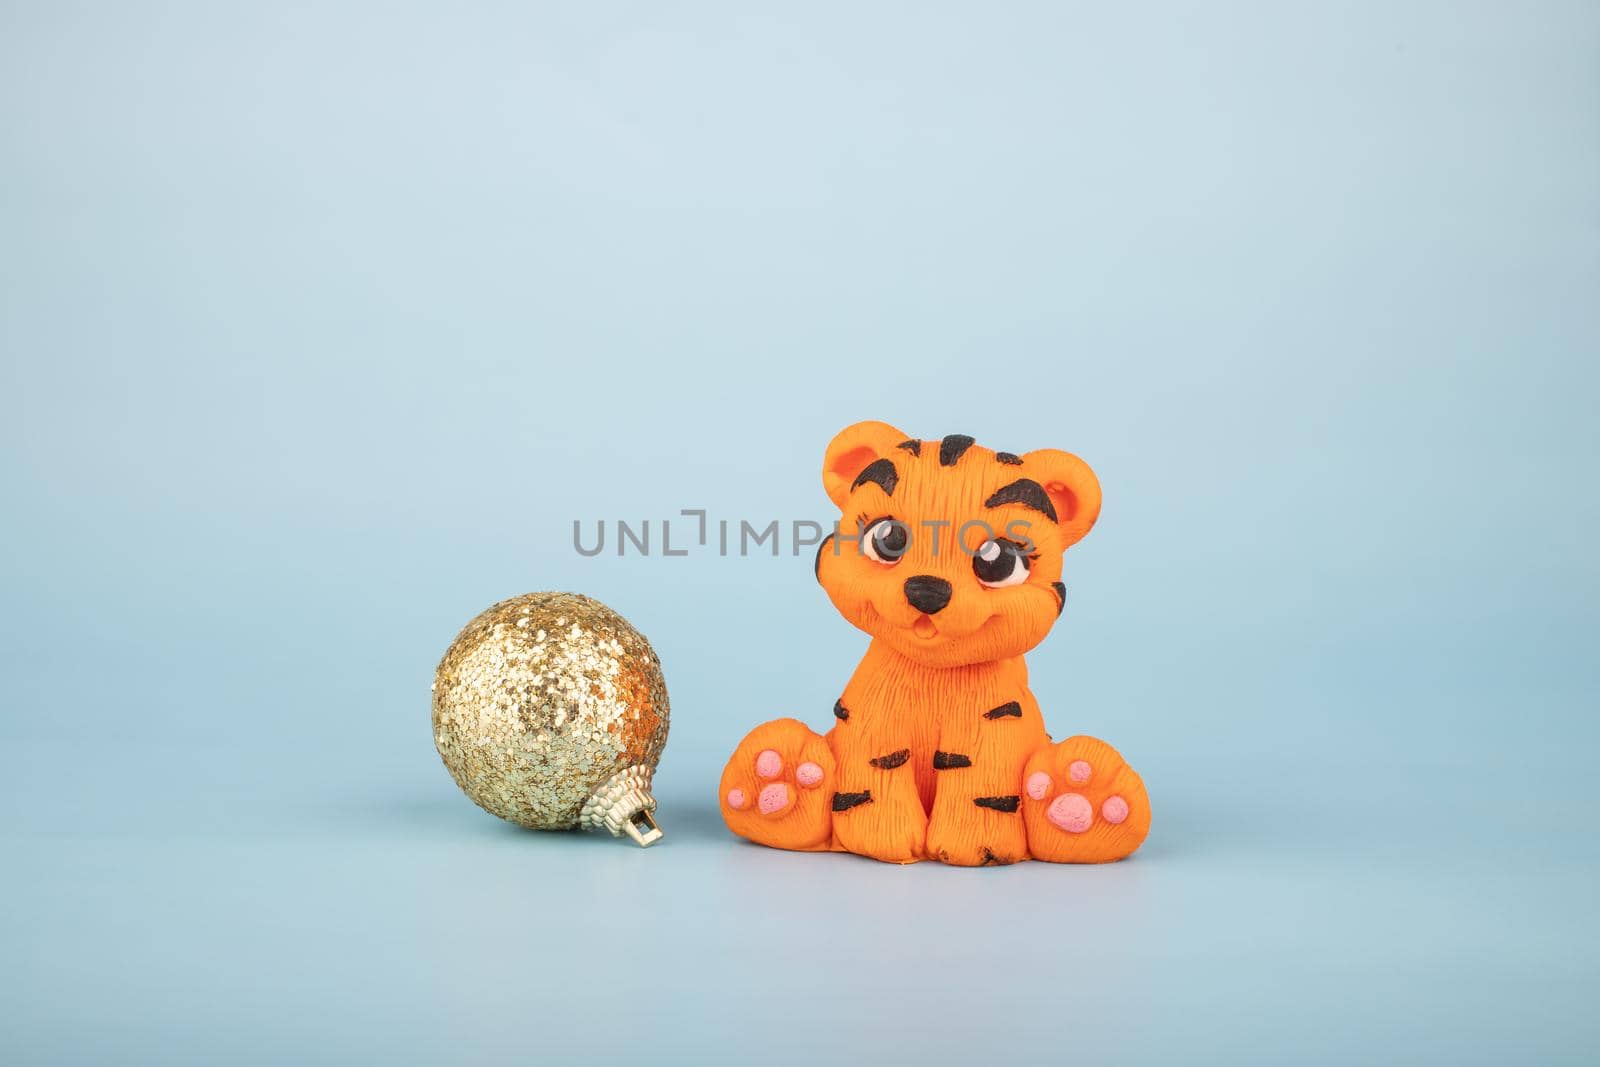 A hand-sculpted orange tiger figurine on a blue background with a golden Christmas tree toy. The year 2022 is the year of the tiger according to the Eastern calendar.